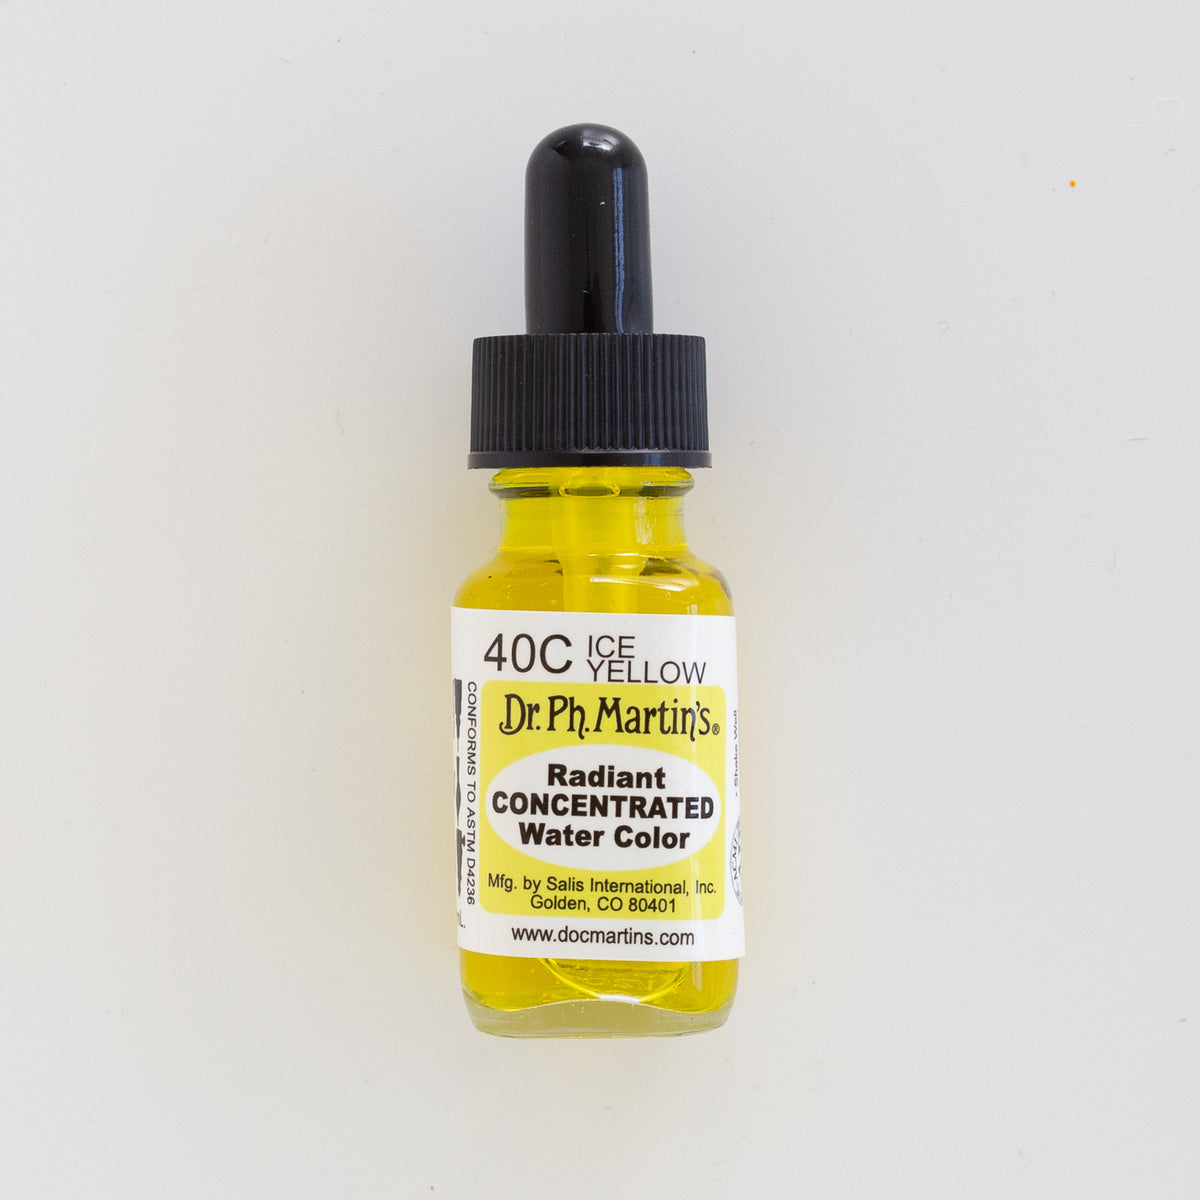 Dr. Ph. Martin’s Radiant Concentrated 40C Ice Yellow